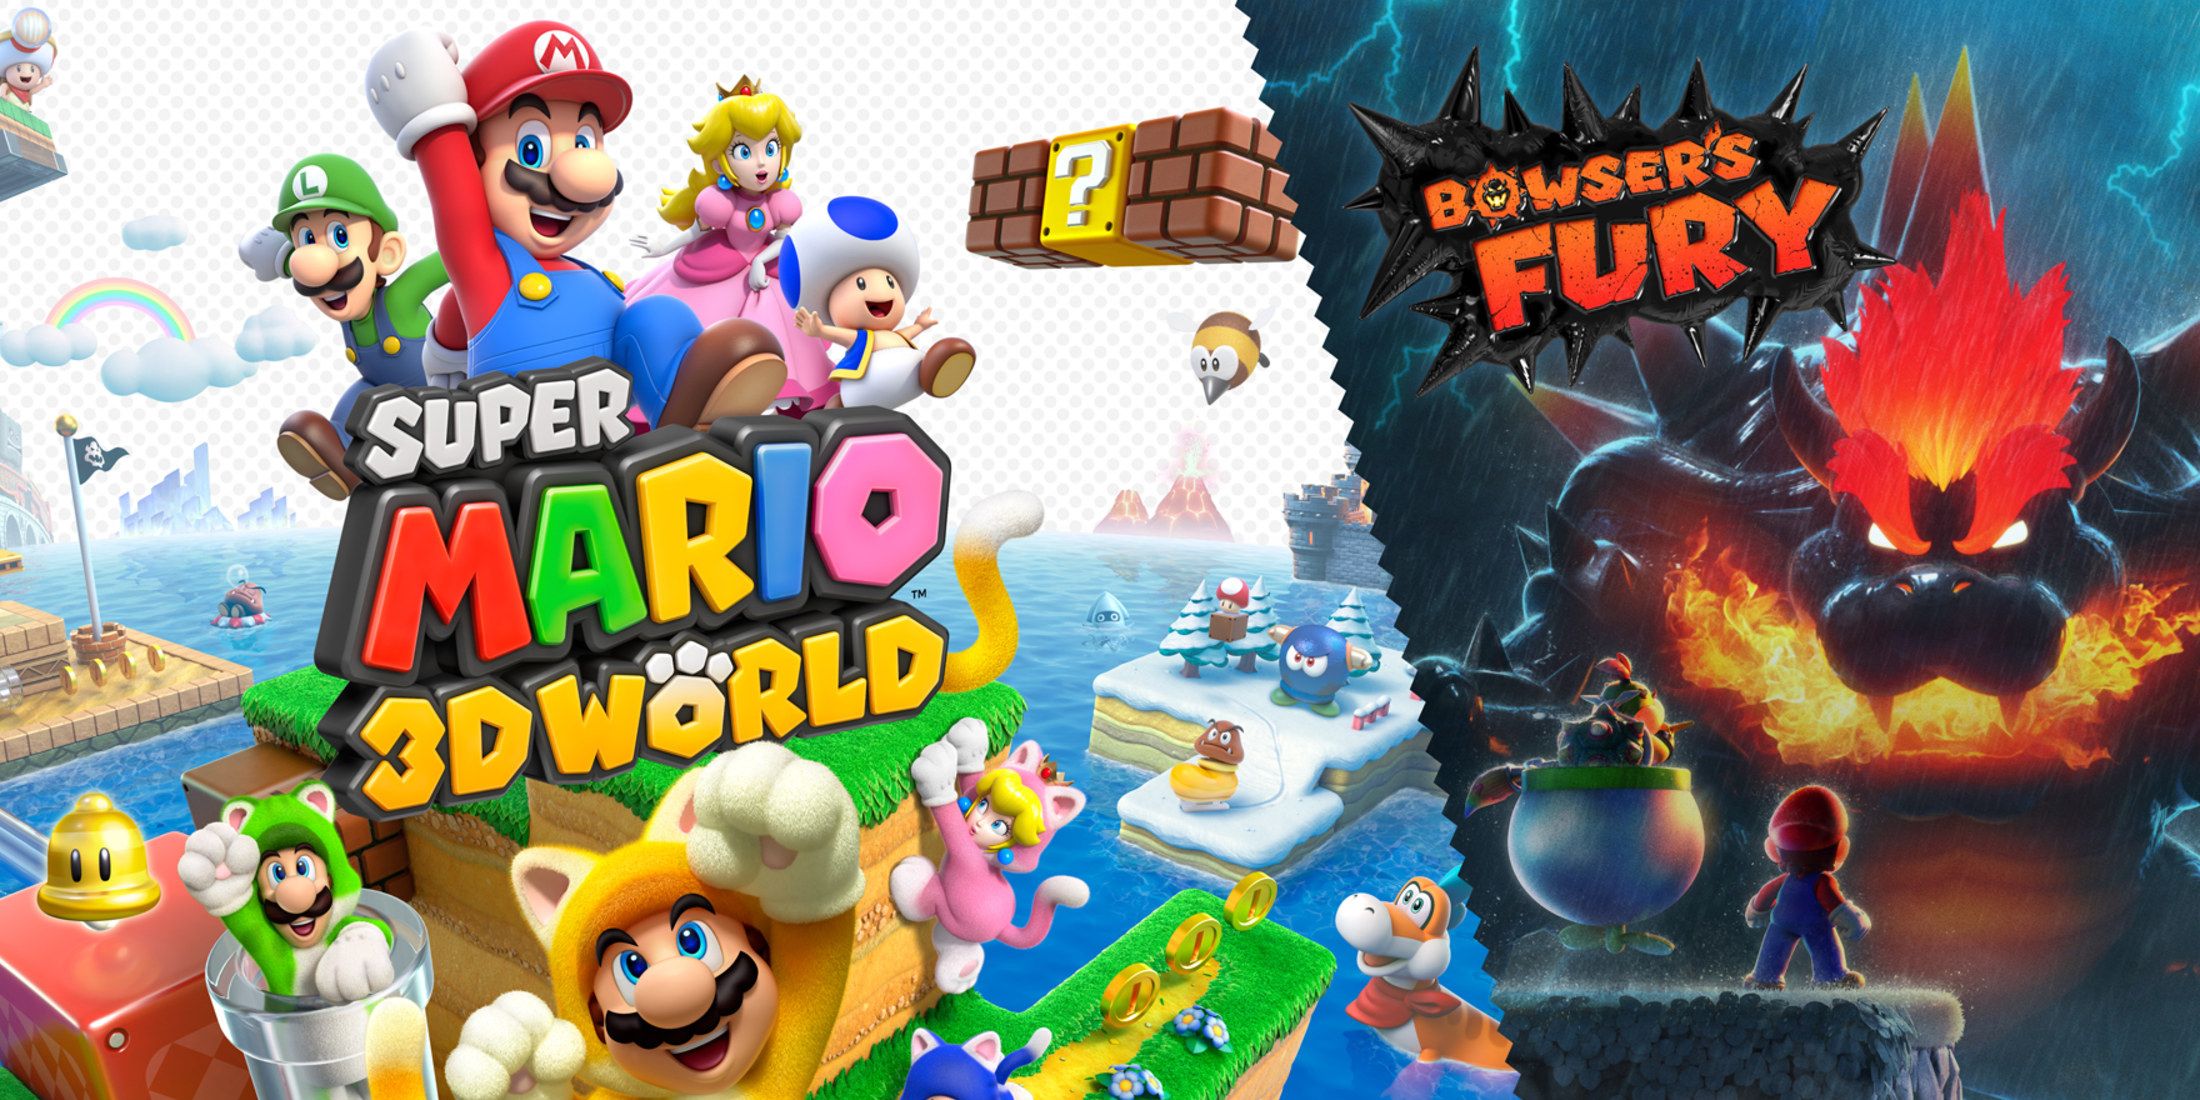 Cover art for Super Mario 3D World + Bowser's Fury featuring Mario, Peach, Luigi, Toad as well as Fury Bowser